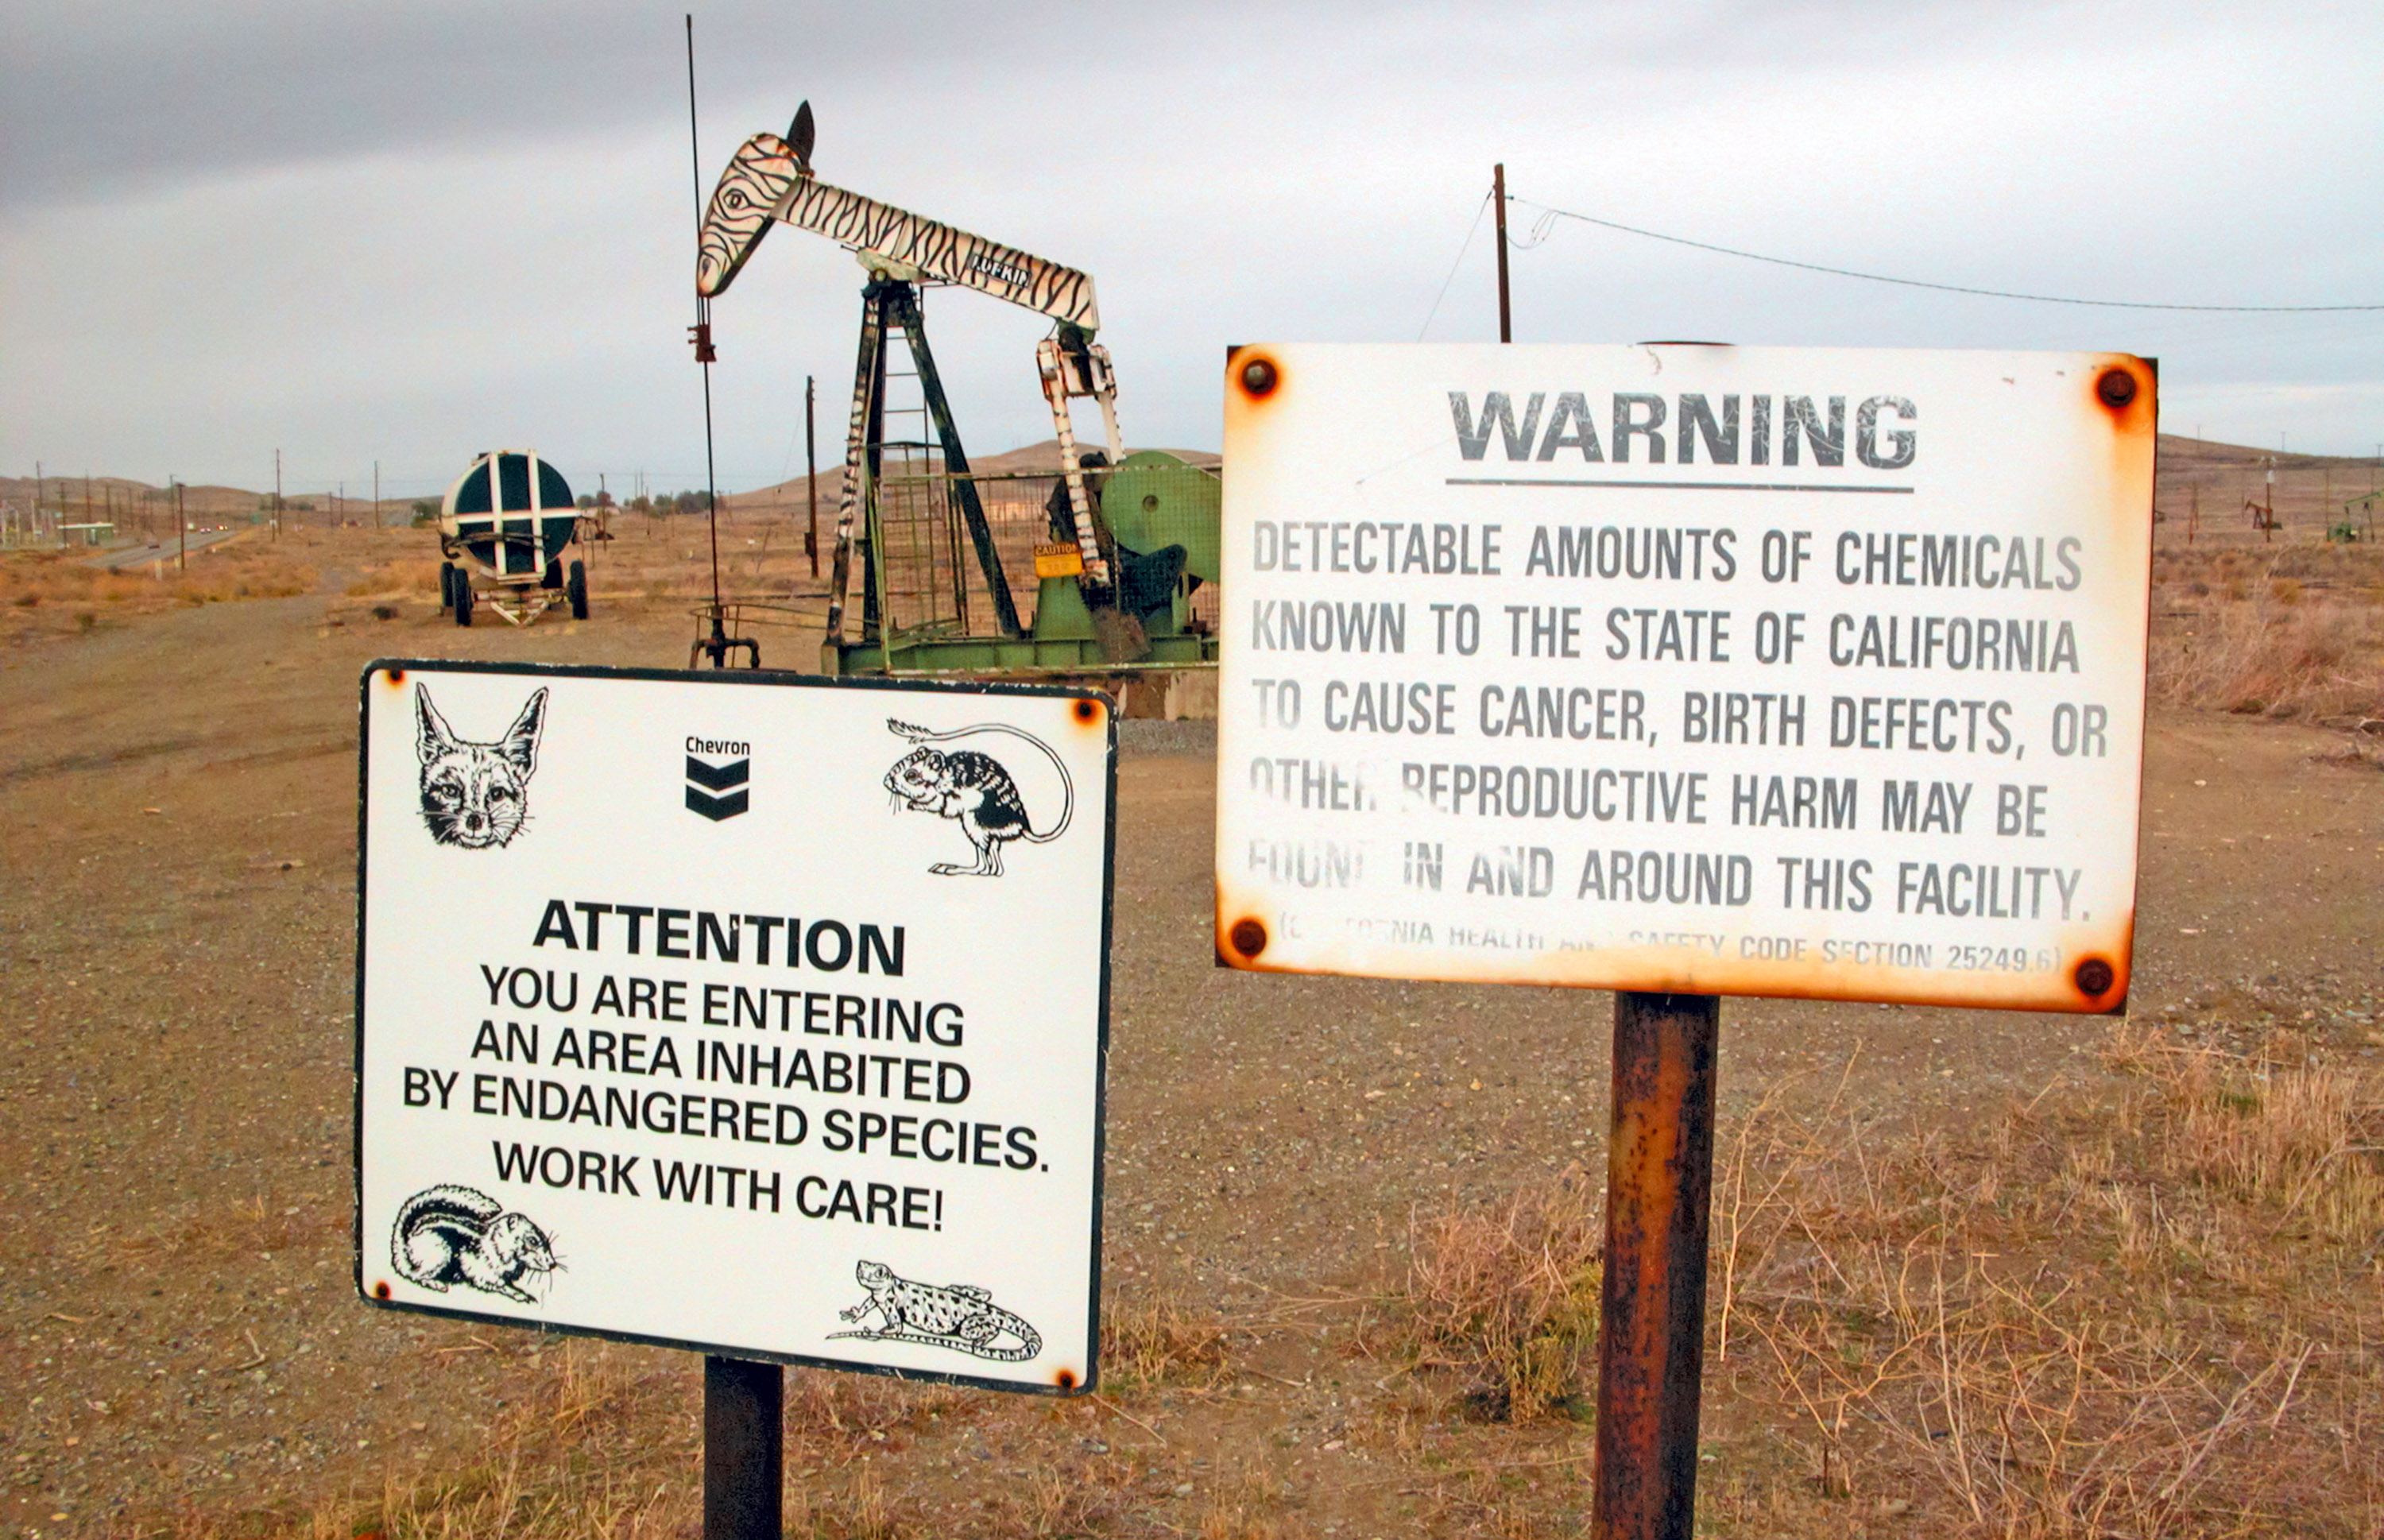 An oil field with a pump jack behind two signs reading "Chevron. Attention you are entering an area inhabited by endangered species. Work with care!" and "Warning. Detectable amounts of chemicals known to the state of California to cause cancer, birth defects, or other reproductive harm may be found in and around this facility."